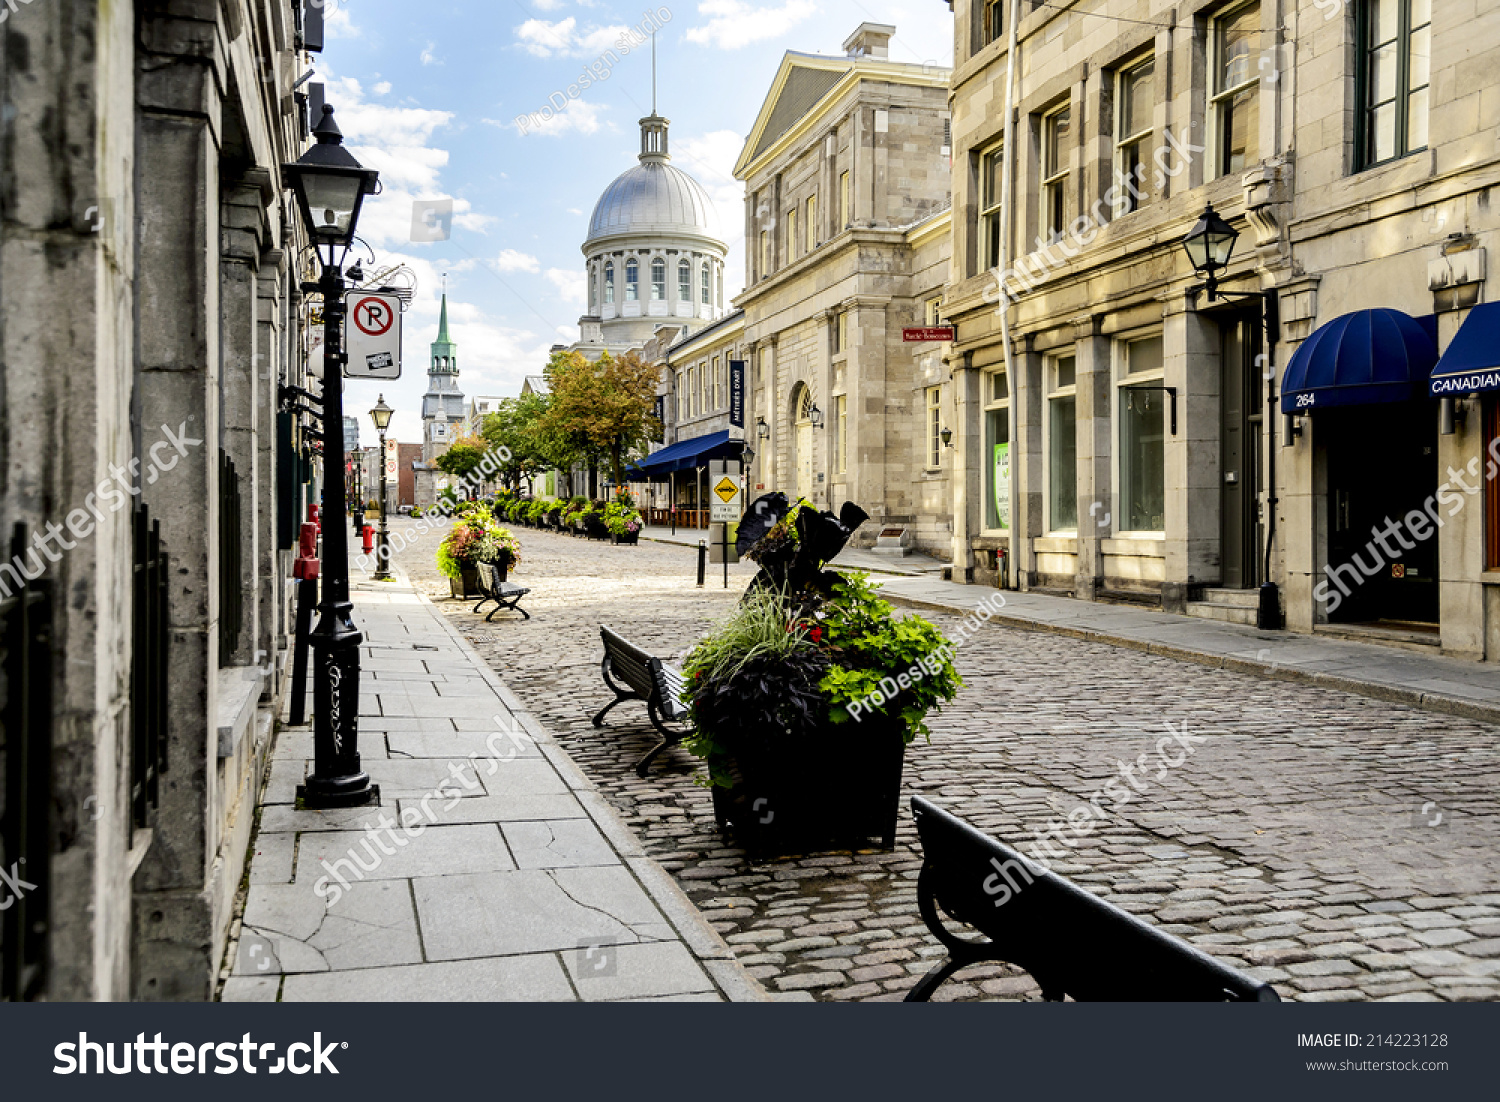 Stock Photo Old City Montreal 214223128 